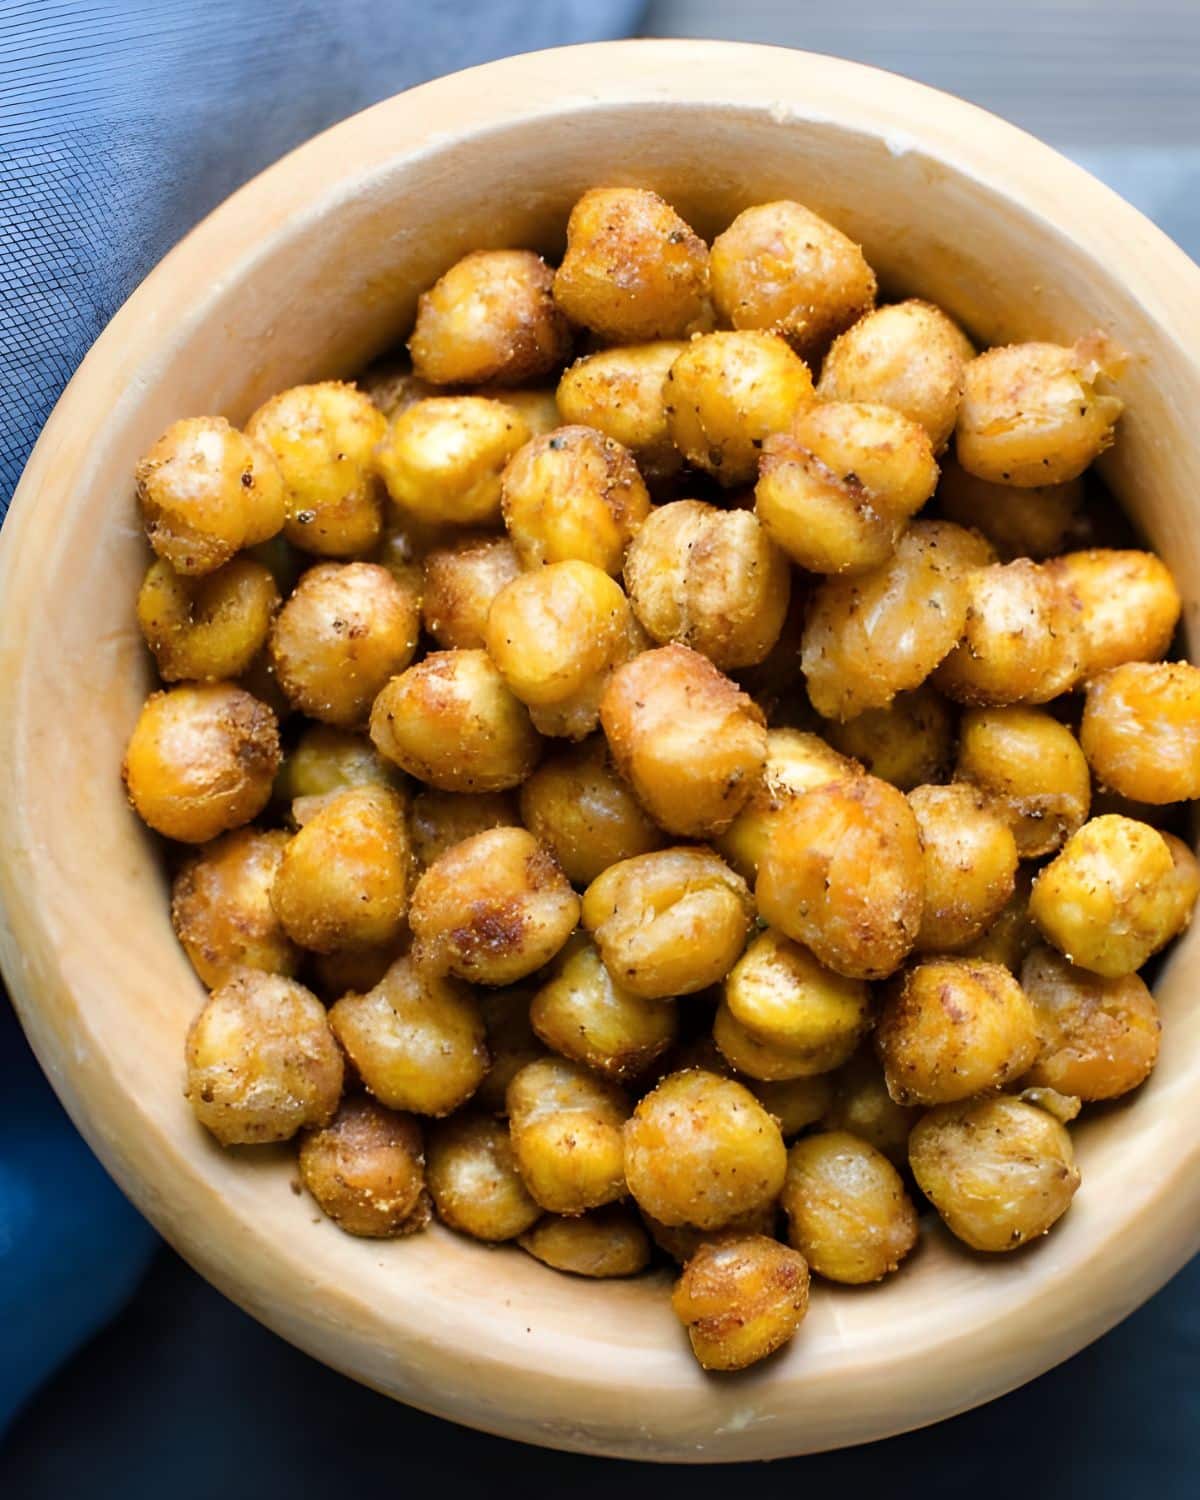 A bowl of spiced chick peas.